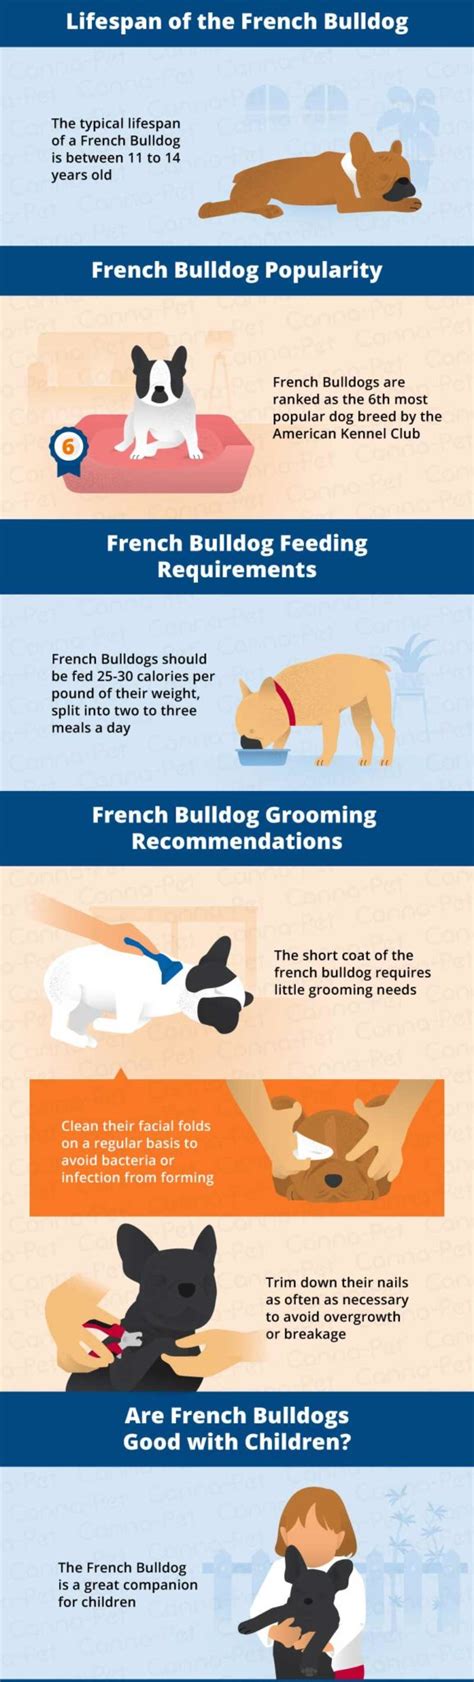 The specific problems encountered by many french bulldogs should be read and understood by anyone considering buying one the kennel club does strongly recommend that all breeders take part in the health scheme run by the french bulldog club of england. French Bulldog - Canna-Pet®